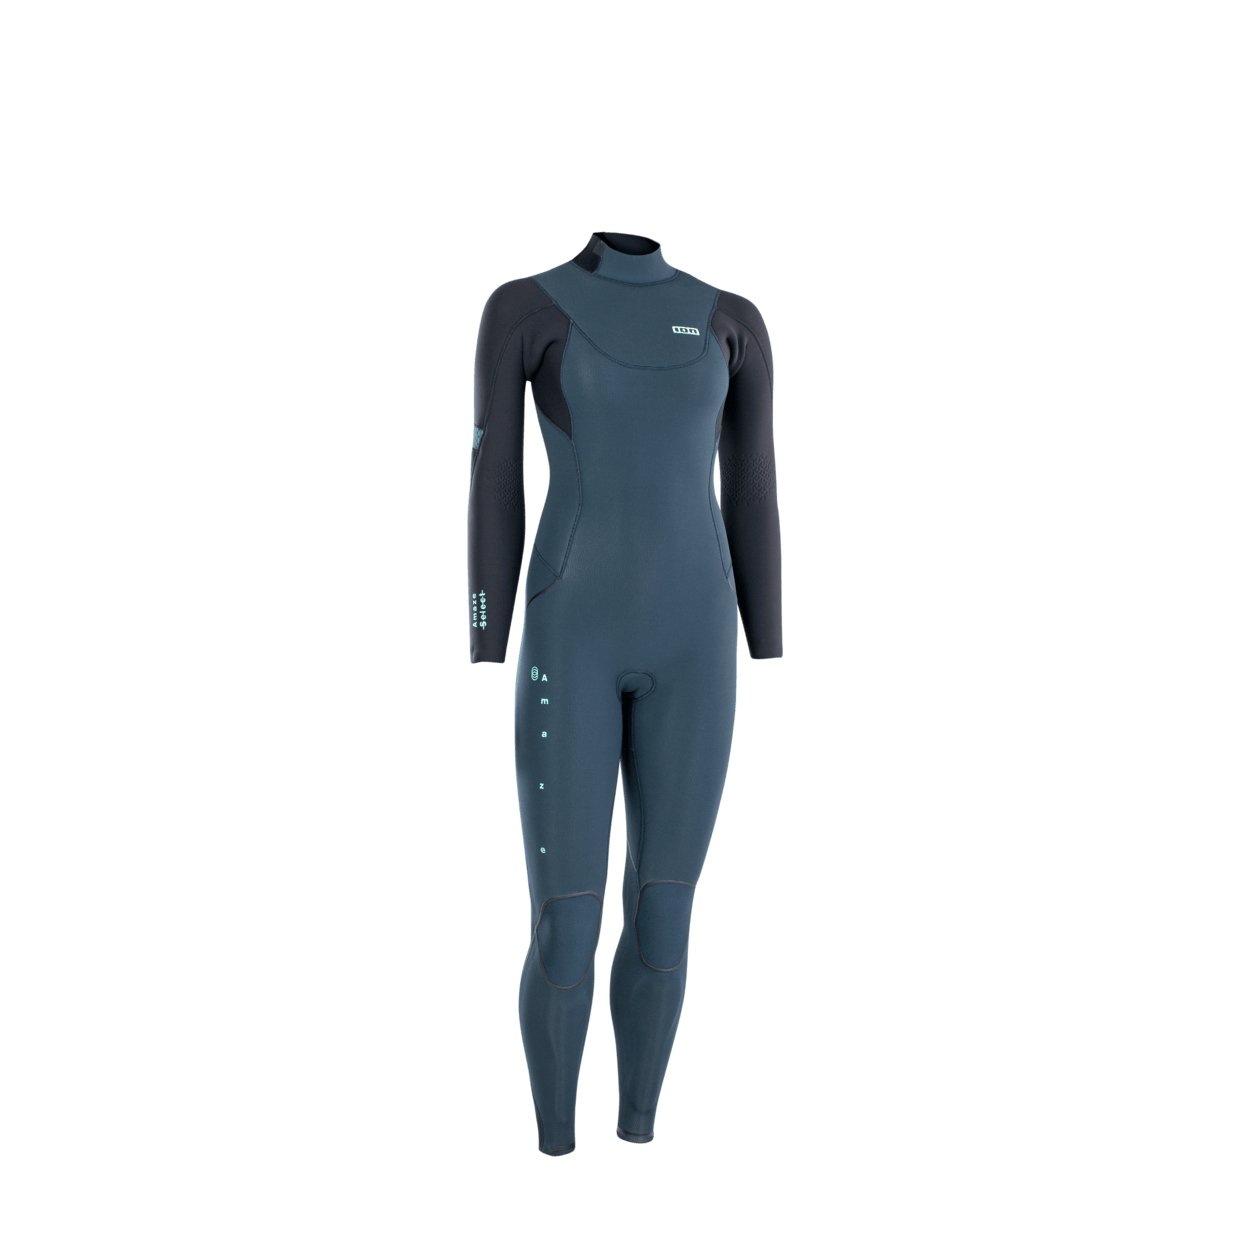 ION Amaze Select 5/4 Back Zip 2022 - Worthing Watersports - 9010583057361 - Wetsuits - ION Water